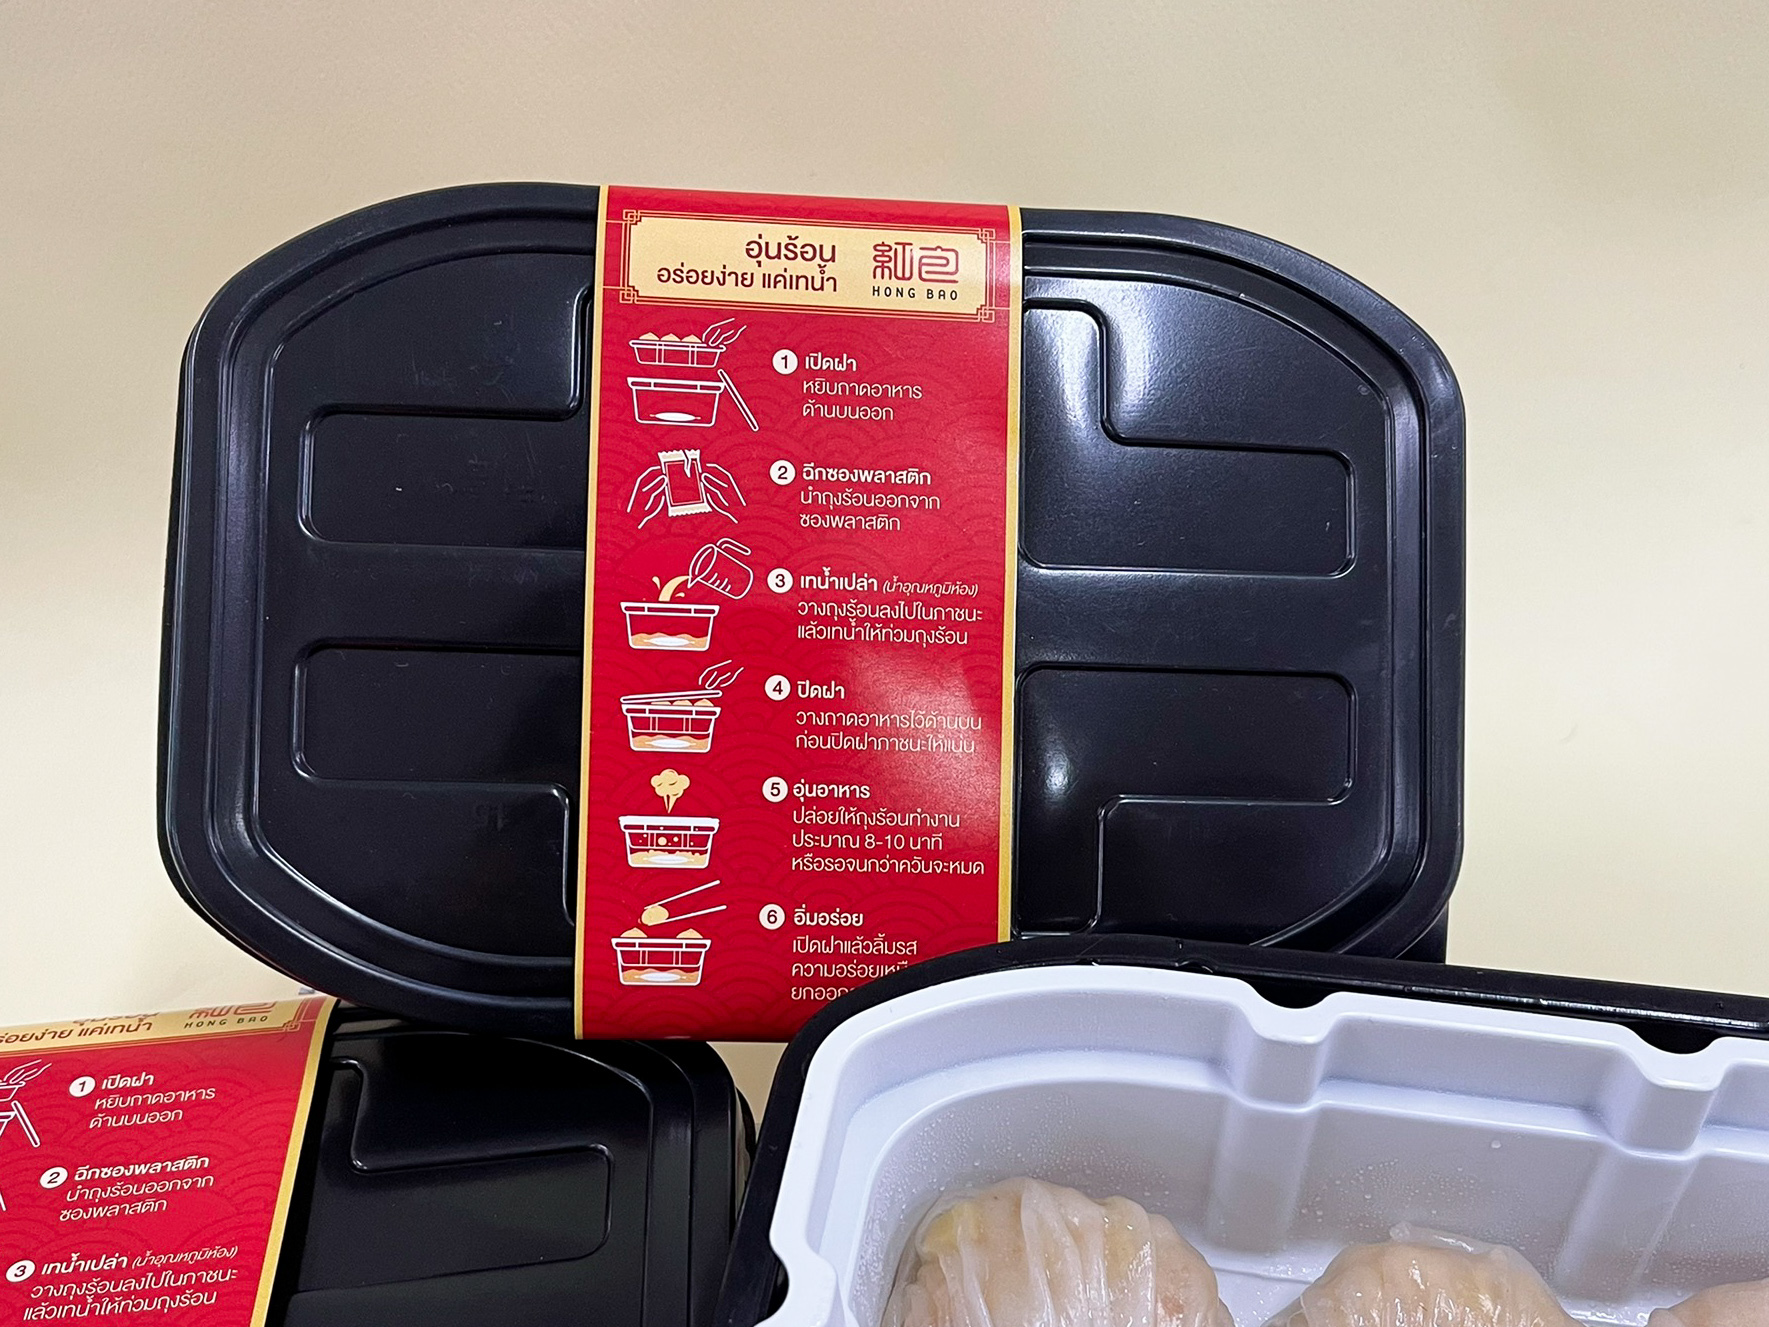 Hong Bao launches Heat Box for hot dim sum delivery